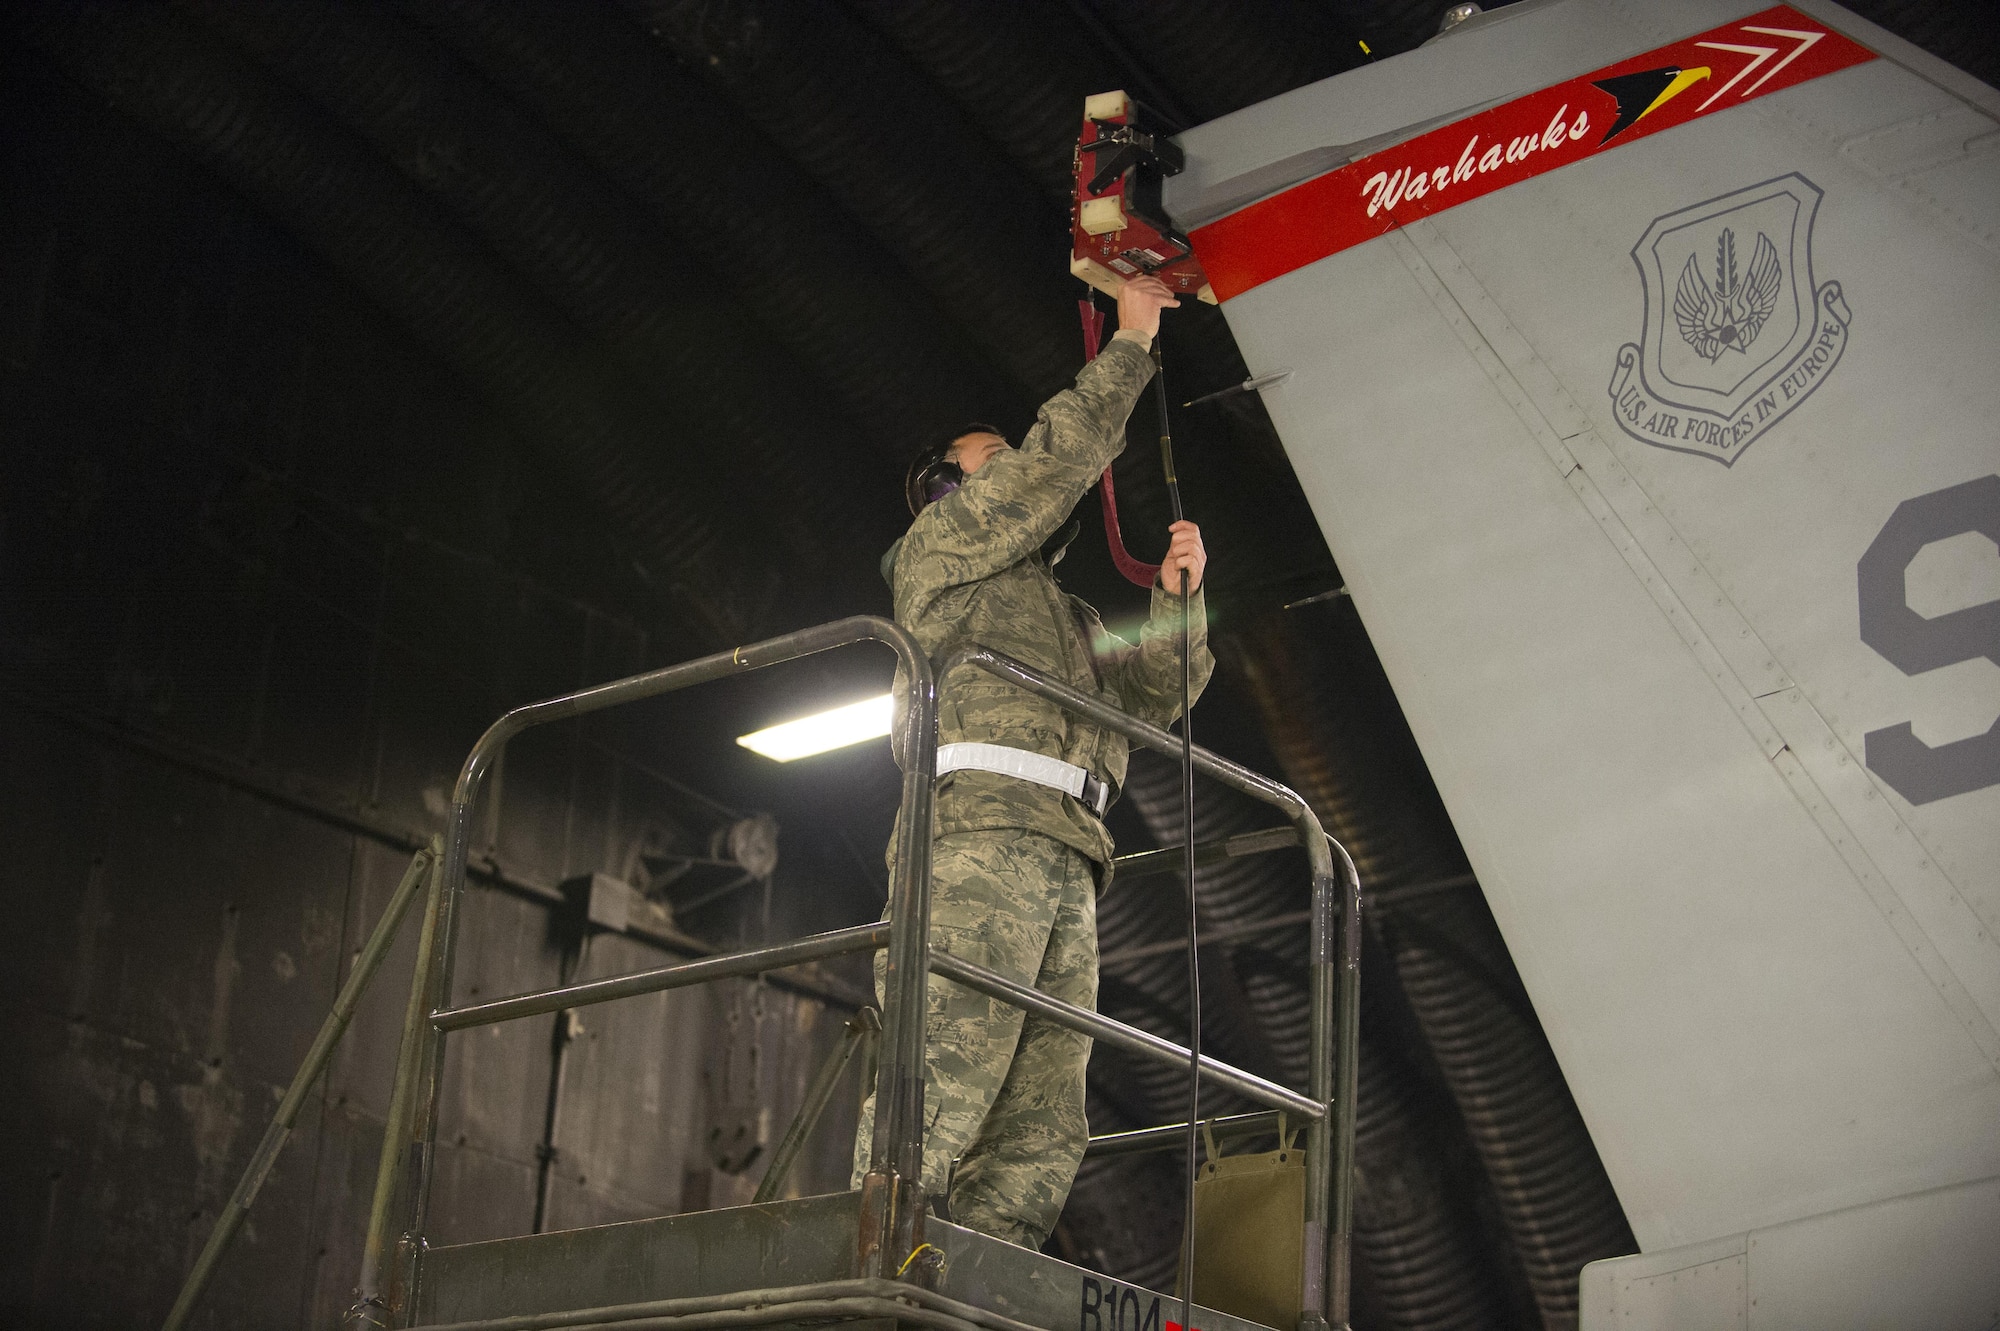 U.S. Air Force Tech. Sgt. Matthew Hoover, Combat Shield flight chief from the 16th Electronic Warfare Squadron, Eglin Air Force Base, Fla., attaches a testing device onto an F-16 Fighting Falcon at Spangdahlem Air Base, Germany, March 23, 2017. A Combat Shield team visited Spangdahlem March
20-24 to evaluate the reliability of several F-16s’ radar threat warning systems and countermeasures. (U.S. Air Force photo by Senior Airman Dawn M. Weber)